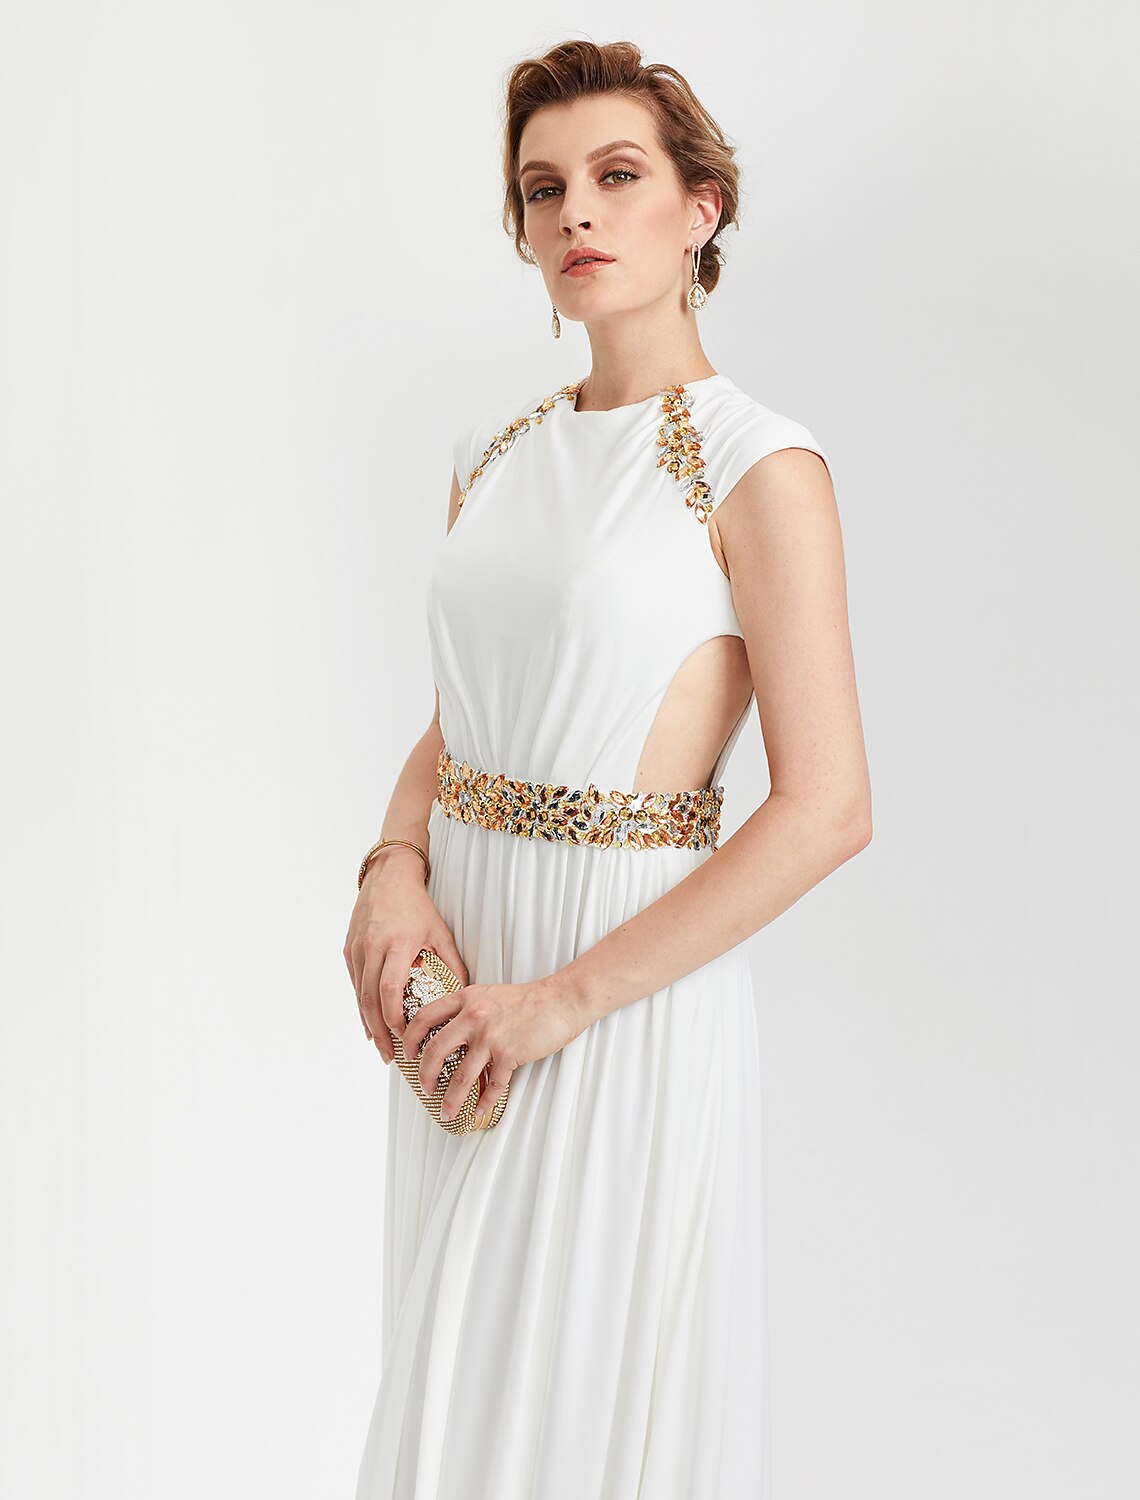 Sheath / Column Celebrity Style Cut Out Formal Evening Dress Crew Neck Short Sleeve Asymmetrical Jersey with Beading